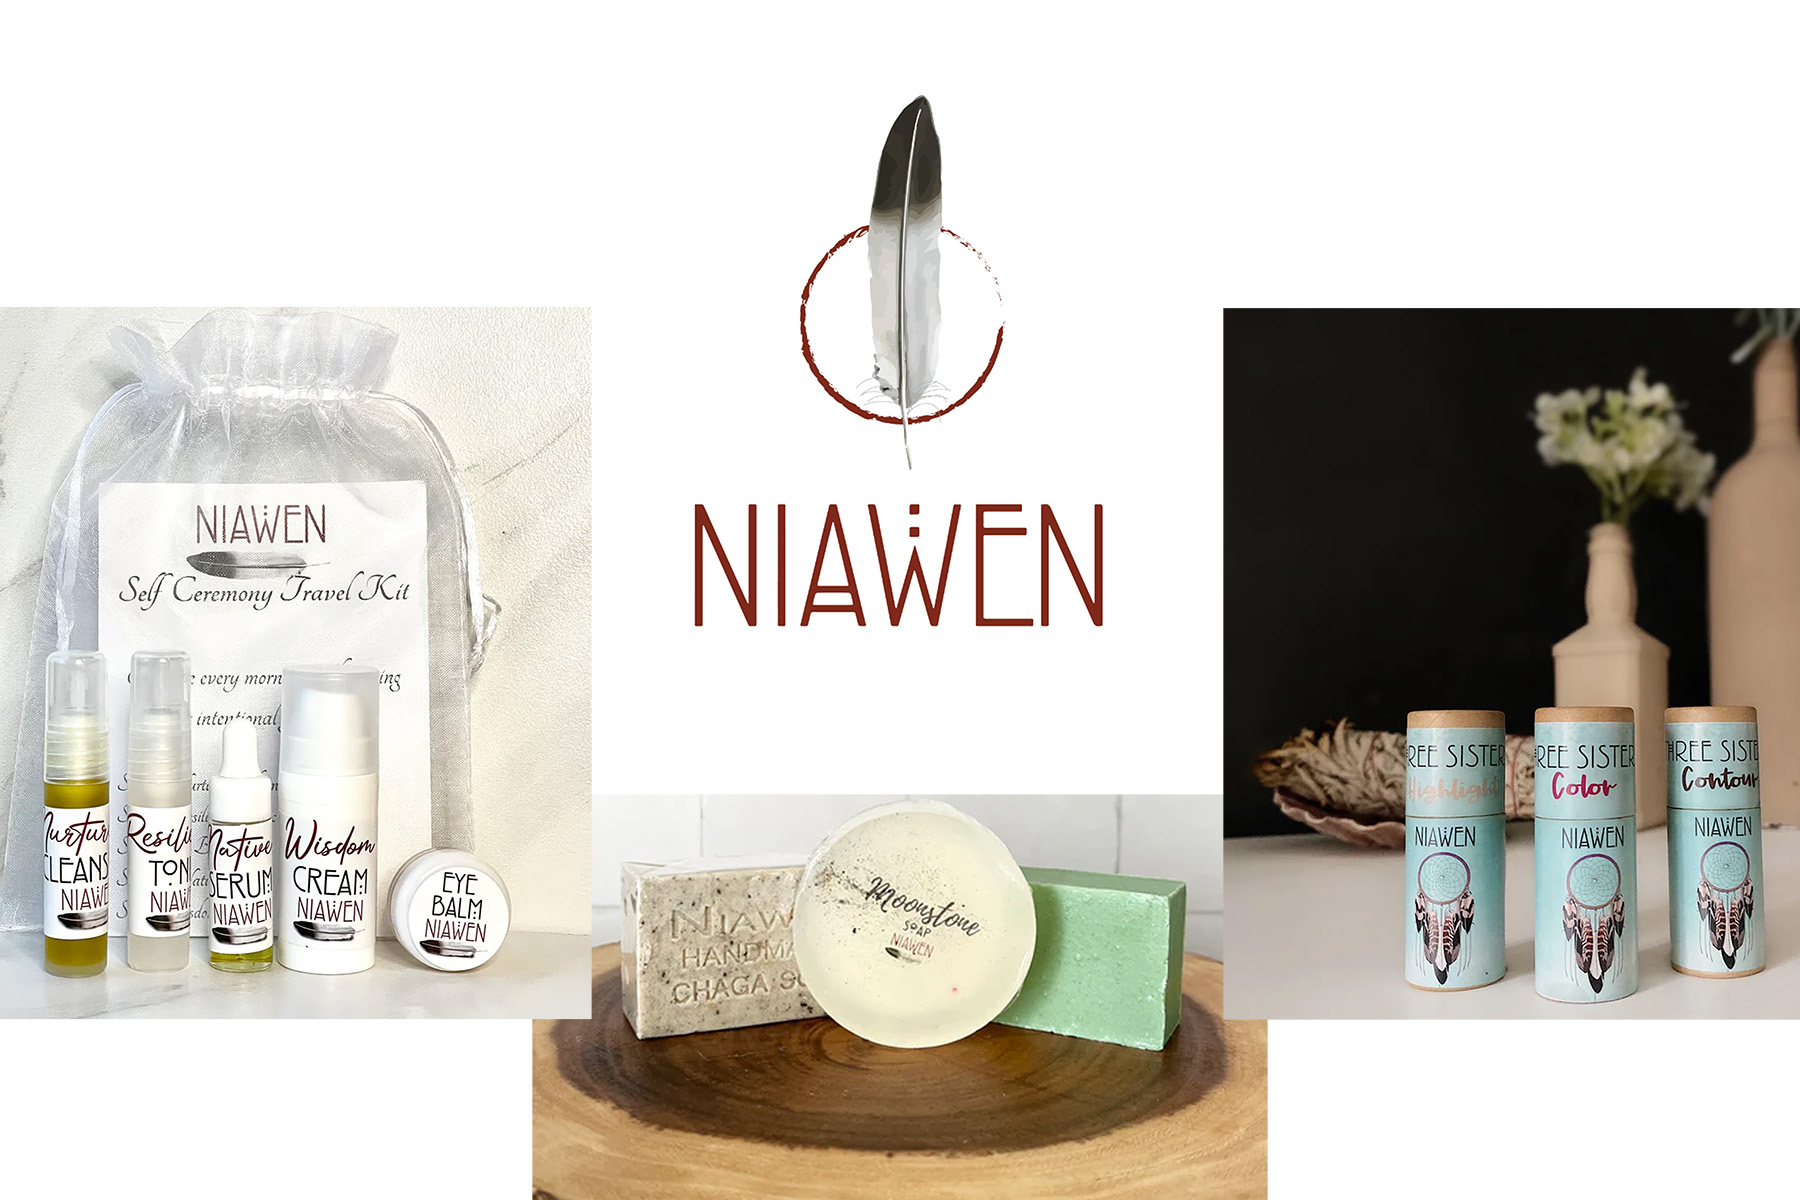 Photo of various Niawen products including soaps, make-up, and a self care travel kit. 